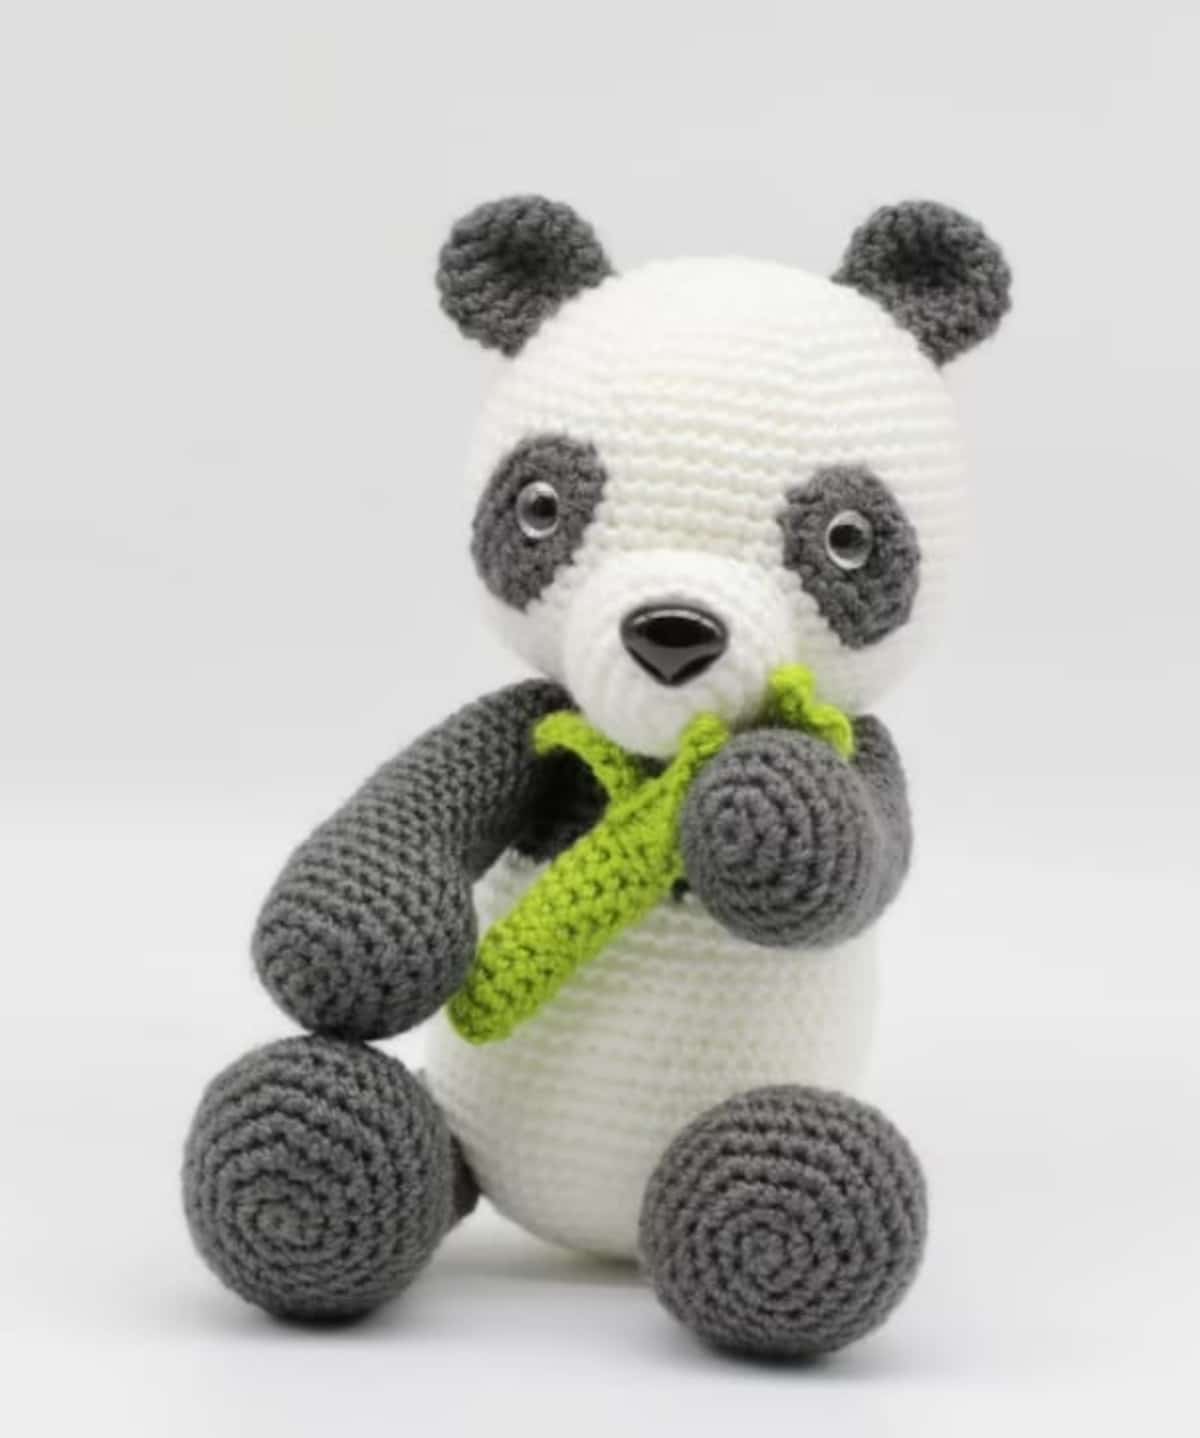 Black and white crochet panda bear sitting down with a green bamboo shoot in his arms and near his mouth on a white background.